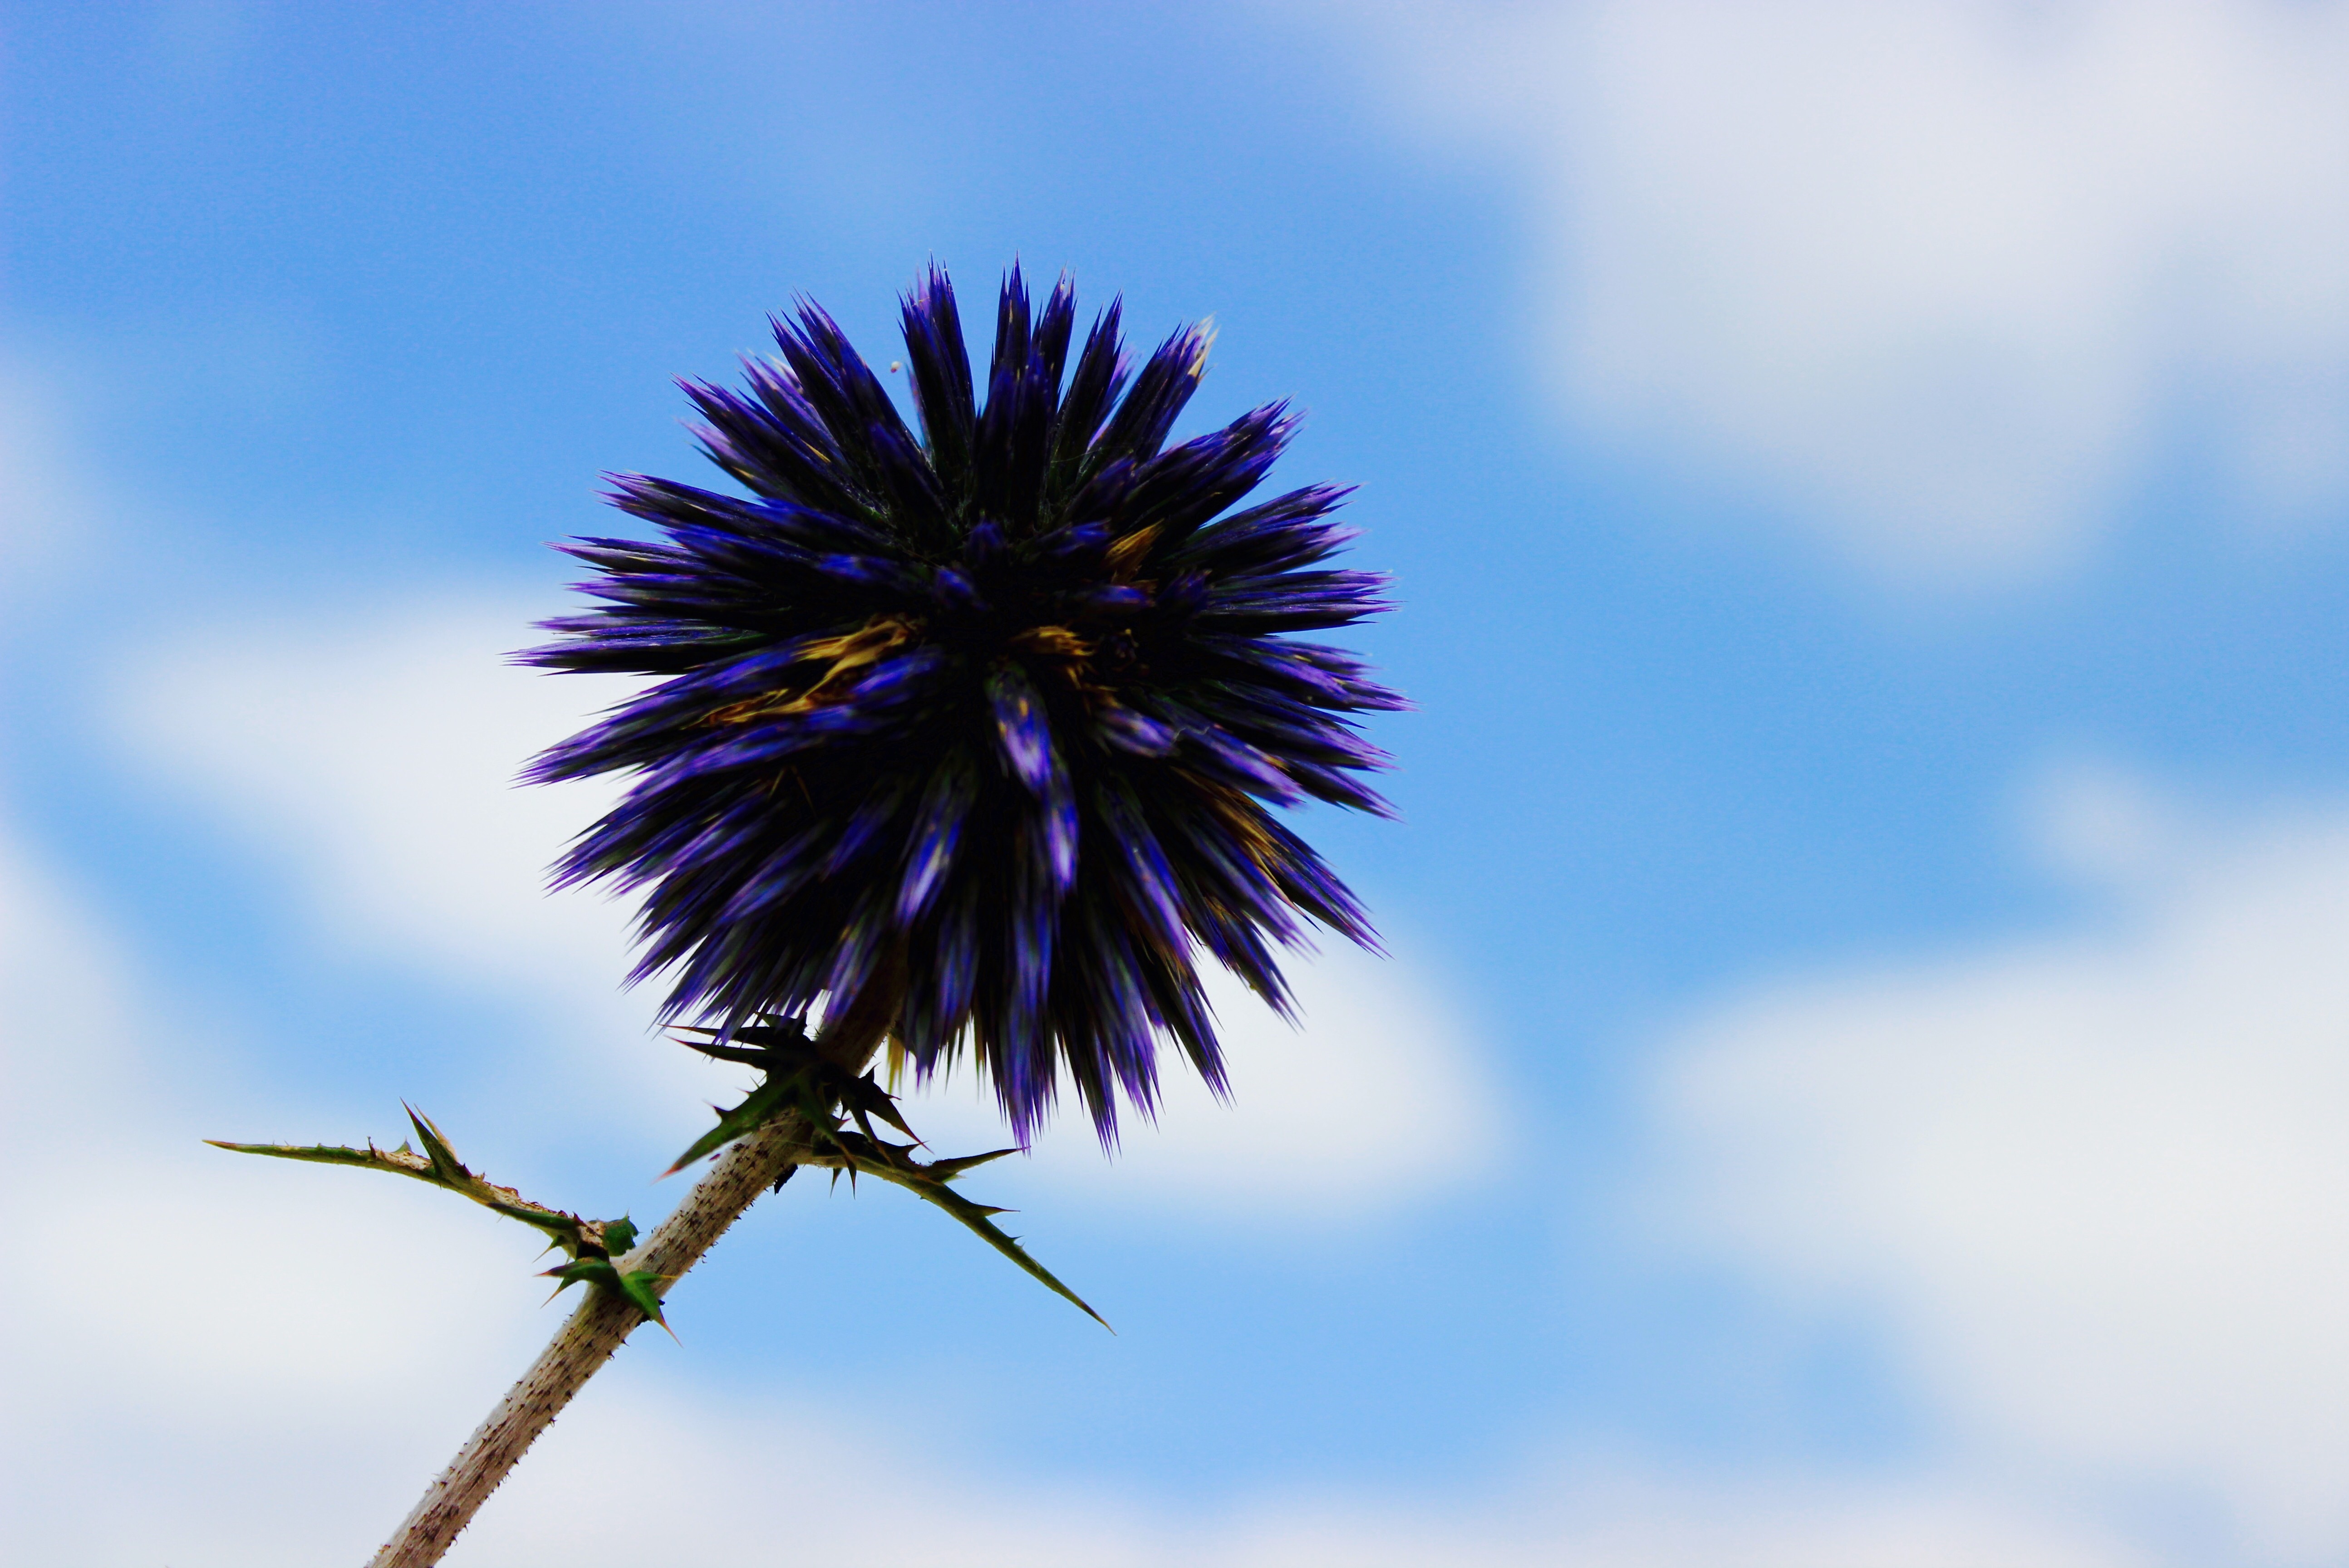 8k Thistle Images